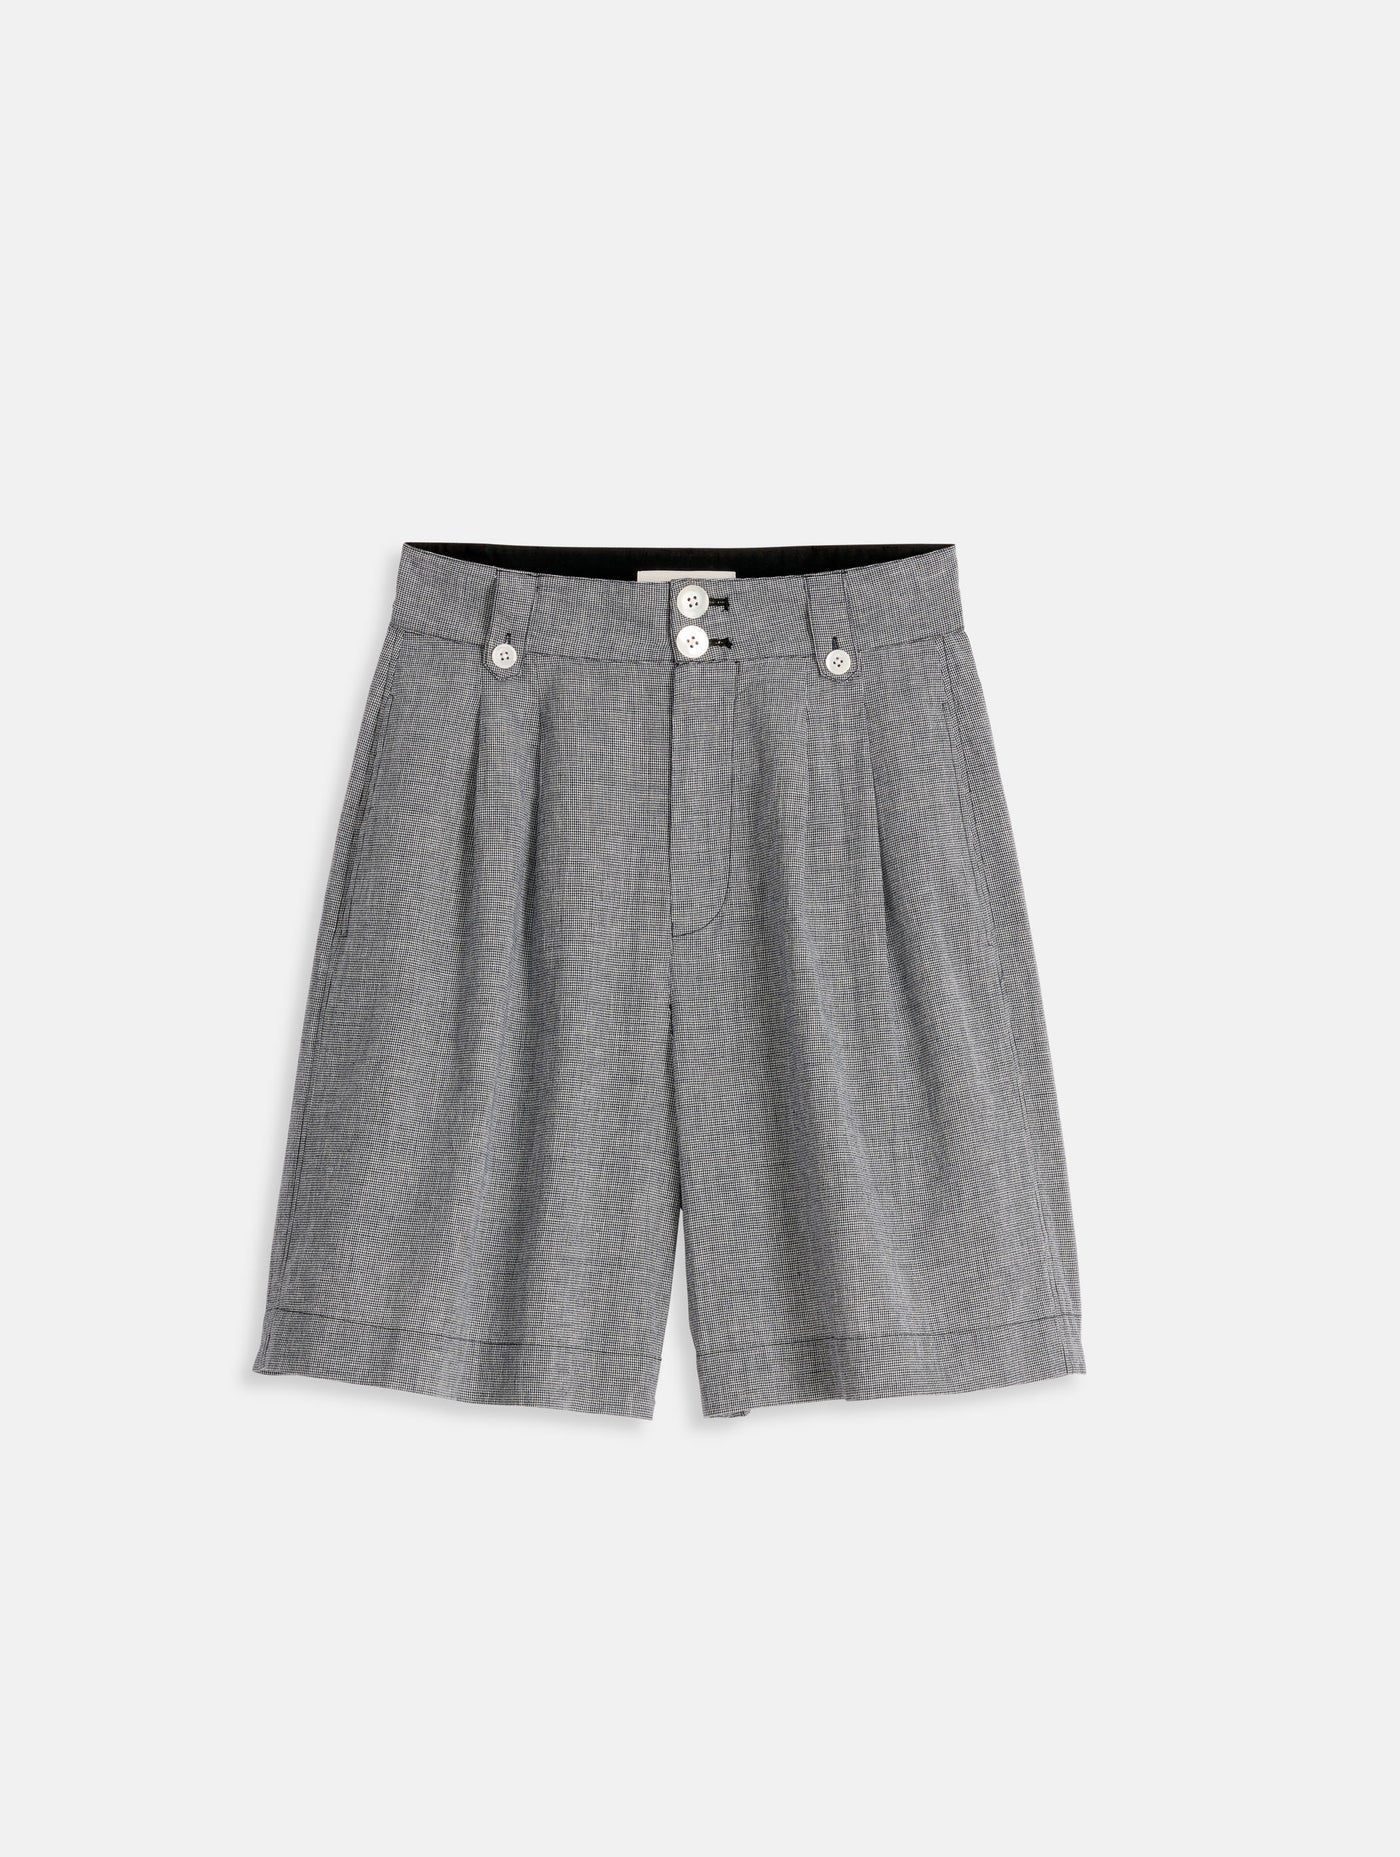 Drill Shorts in Houndstooth